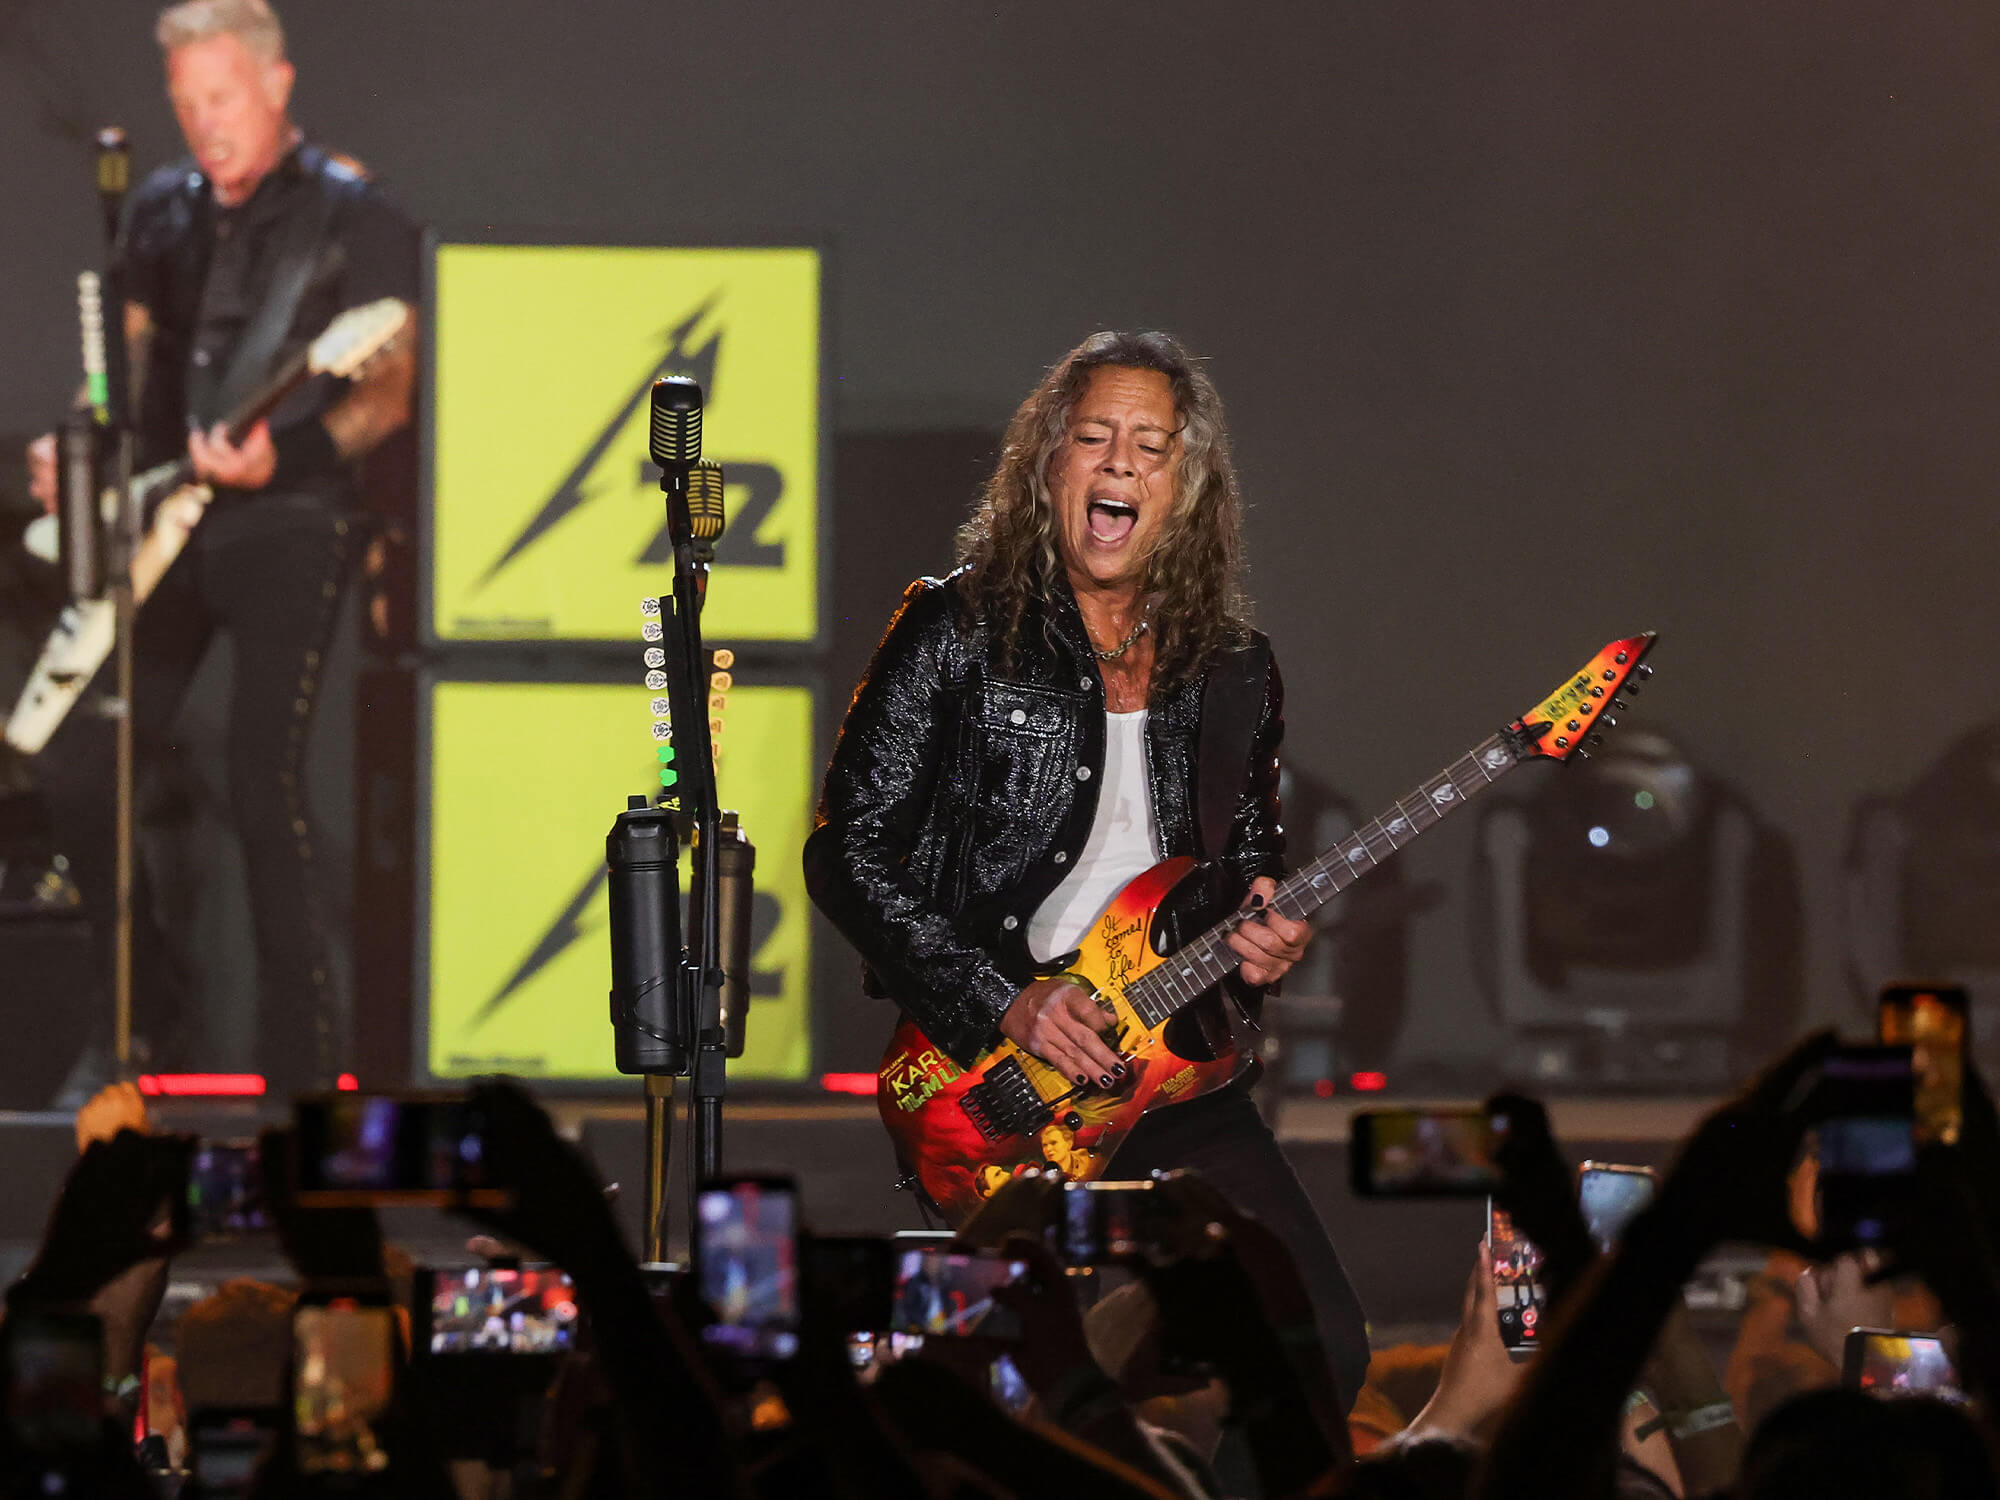 Kirk Hammett playing guitar. He has his mouth open as if shouting or singing, and has long hair and dark clothes on.